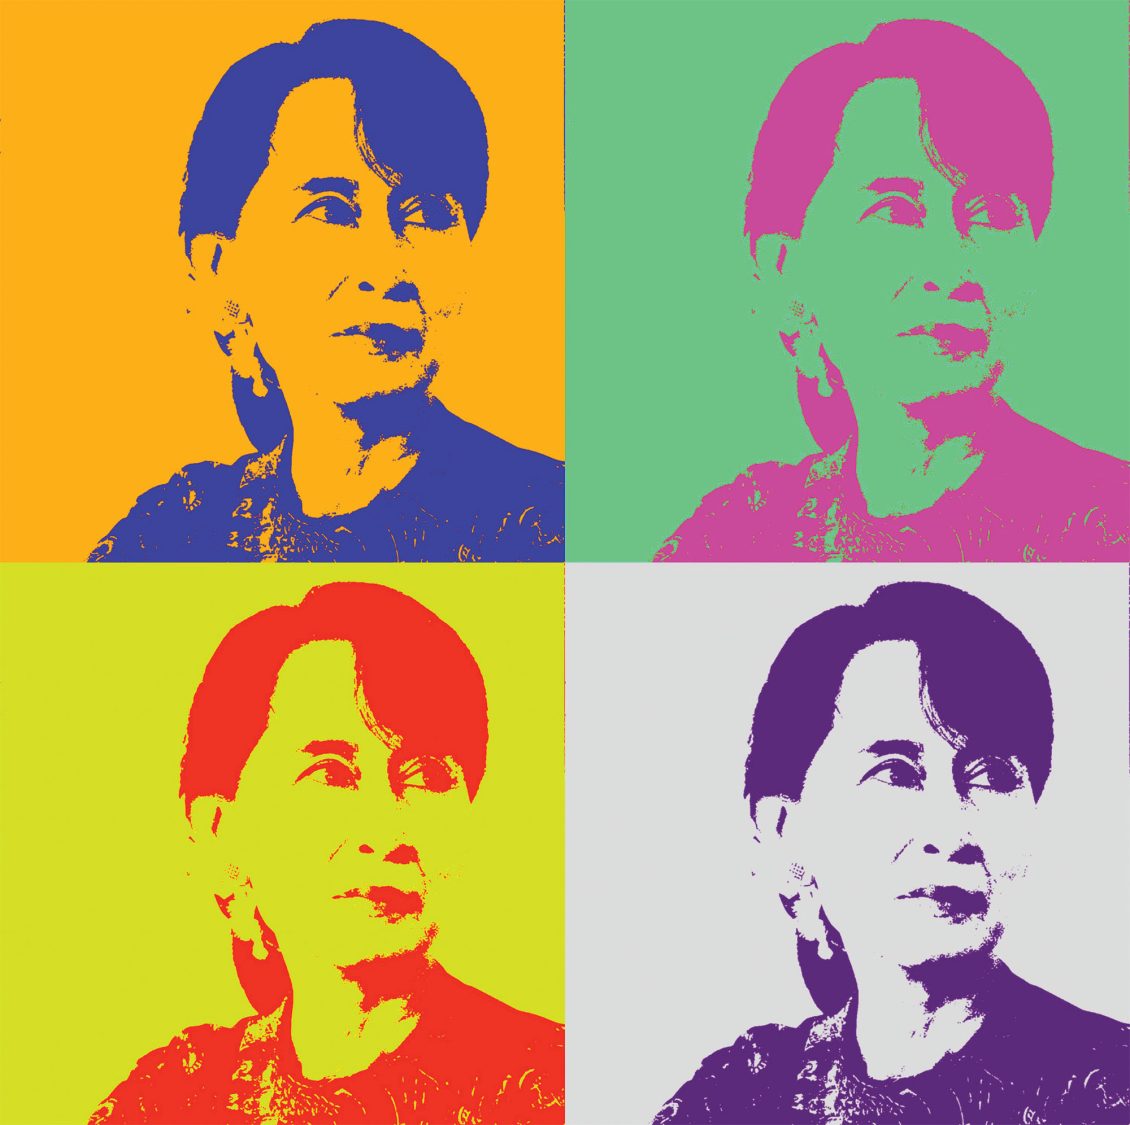 Who Is the Real Aung San Suu Kyi?